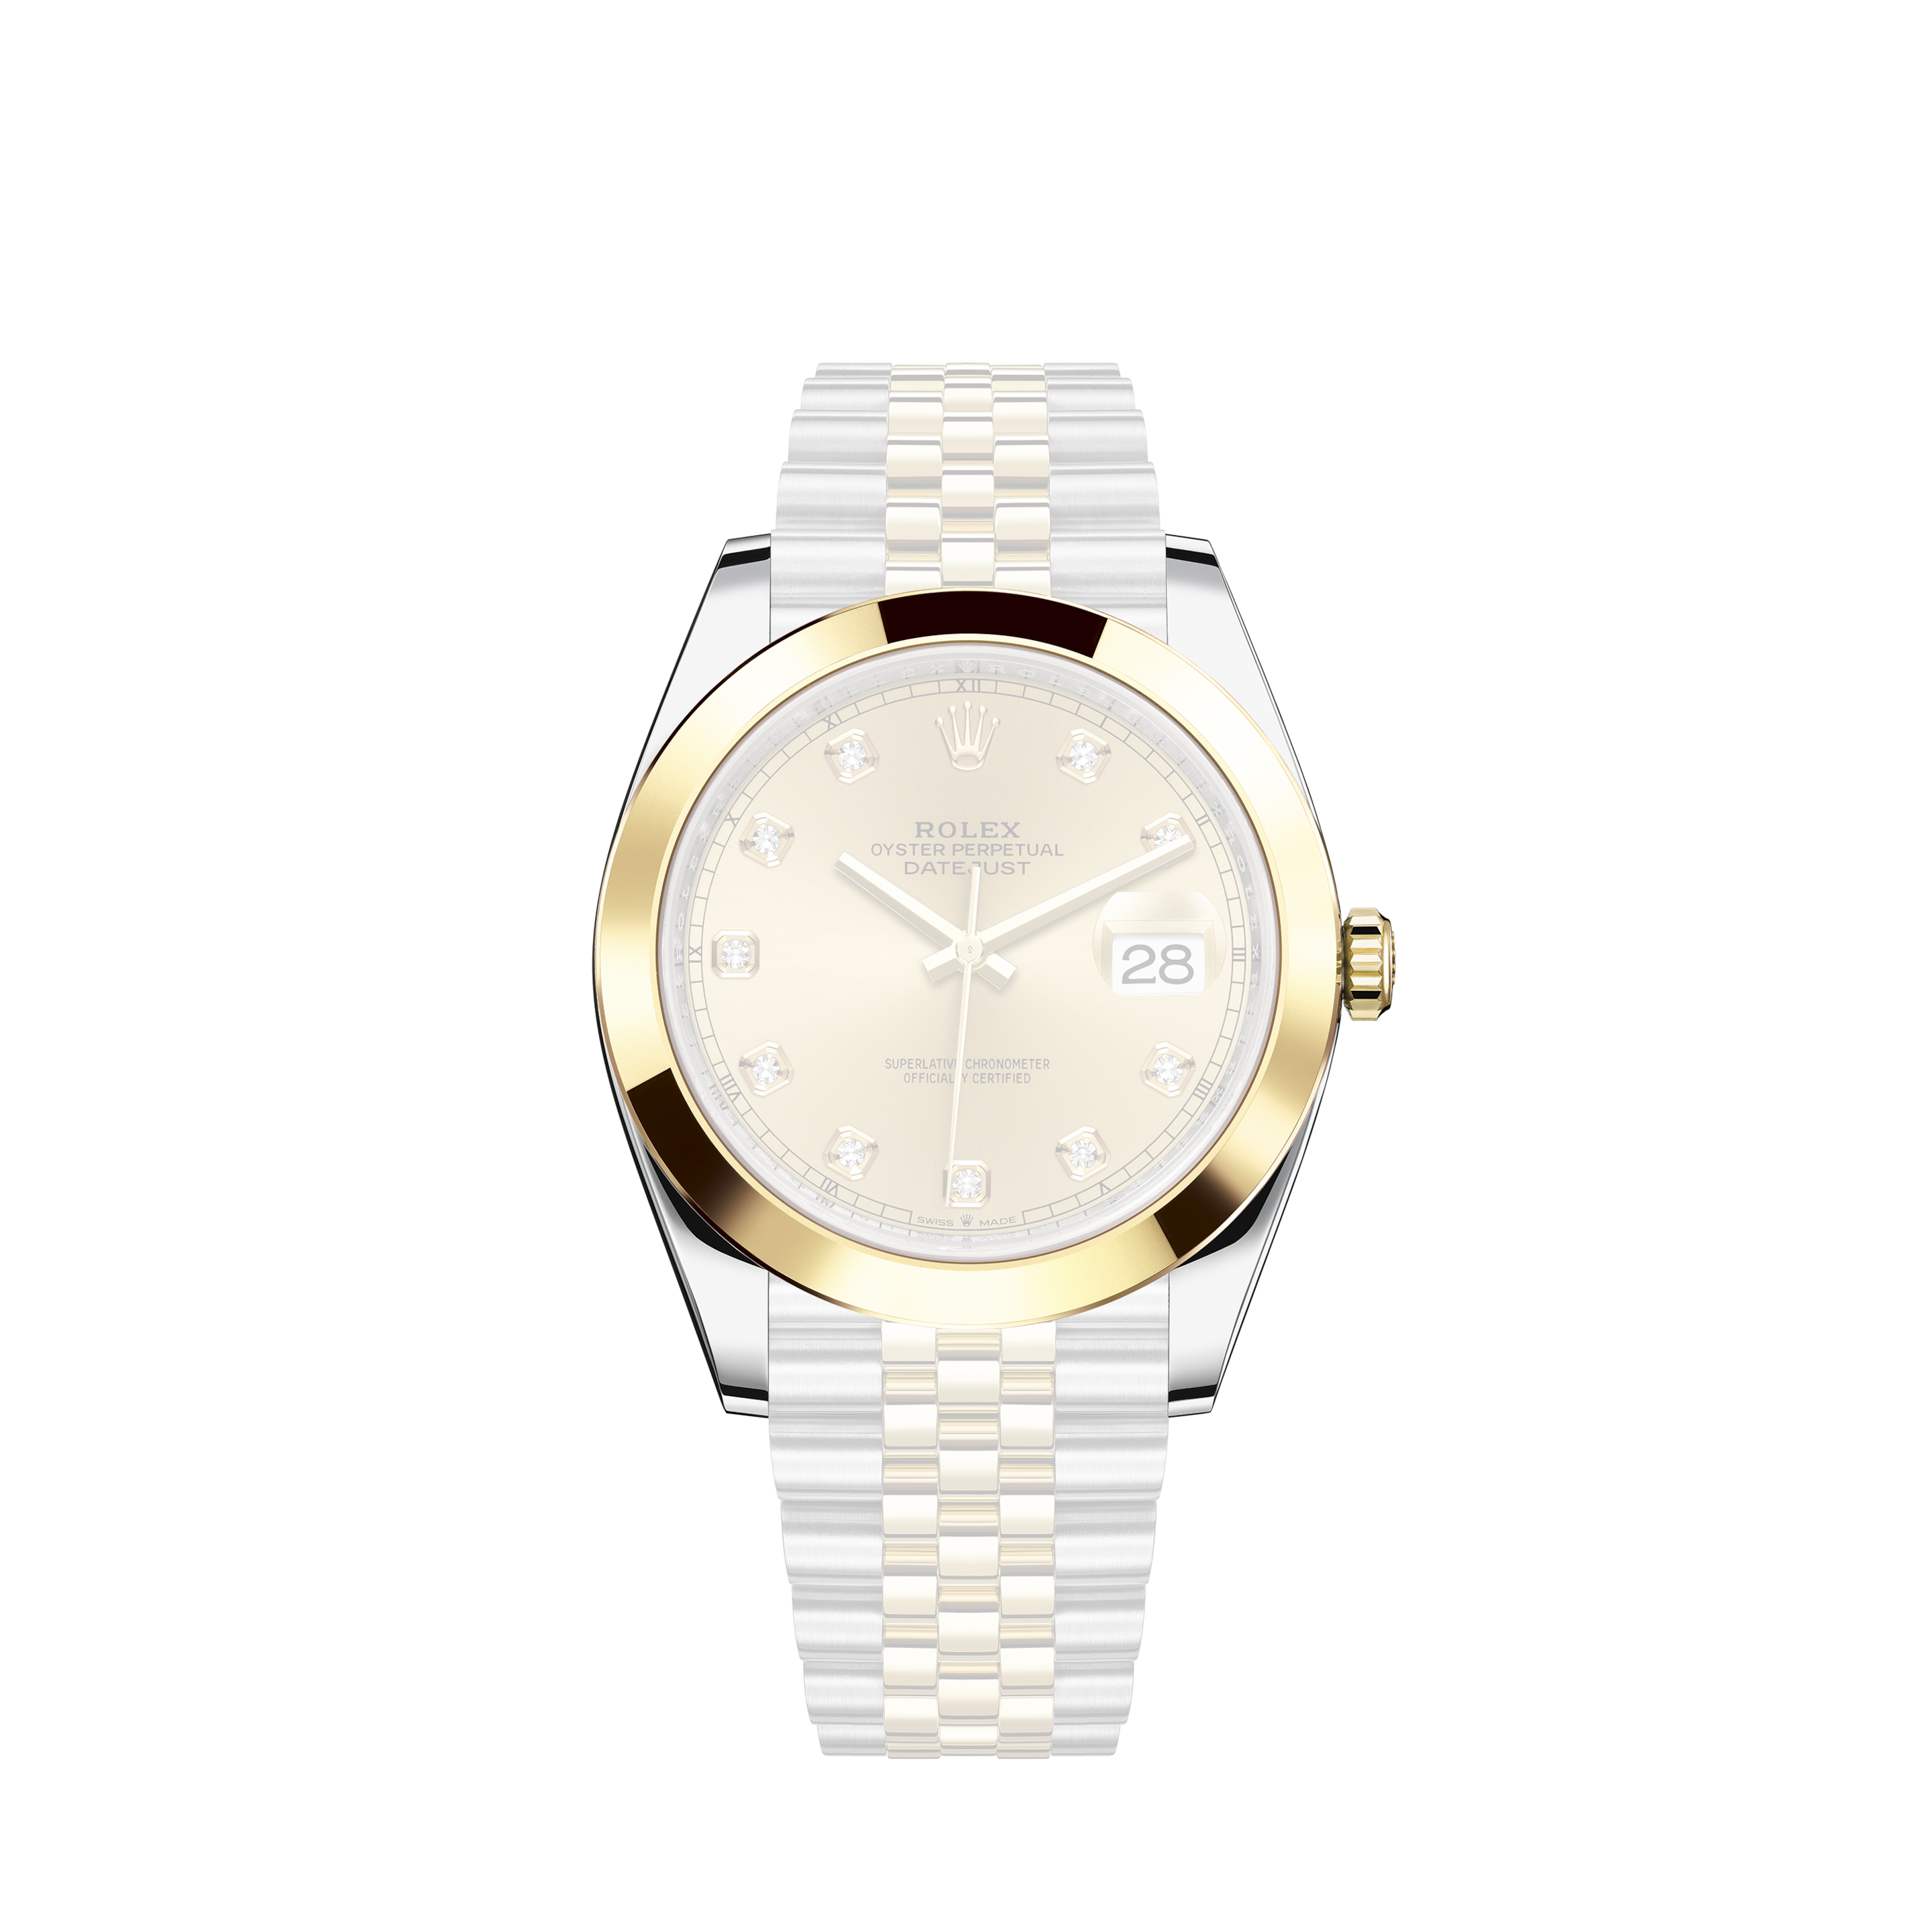 Rolex Datejust Steel / Gold Automatic Women's Watch Oyster Perpetual Ref. 179173